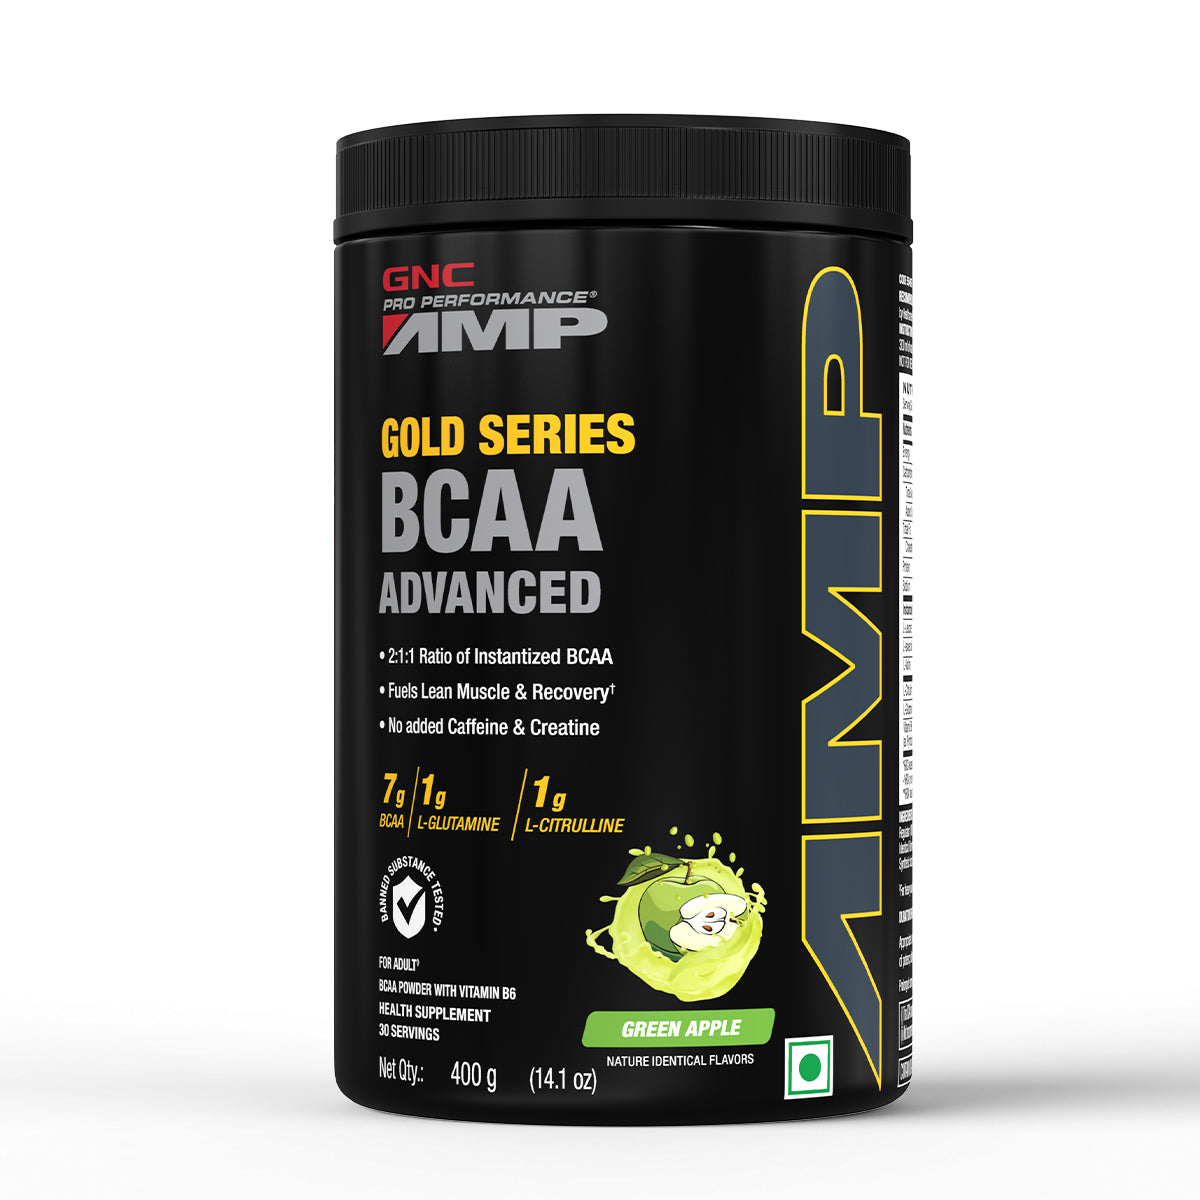 GNC AMP Gold Series BCAA Advanced - Fuels Lean Muscle Strength & Recovery | Informed Choice Certified | 400g | 30 Servings